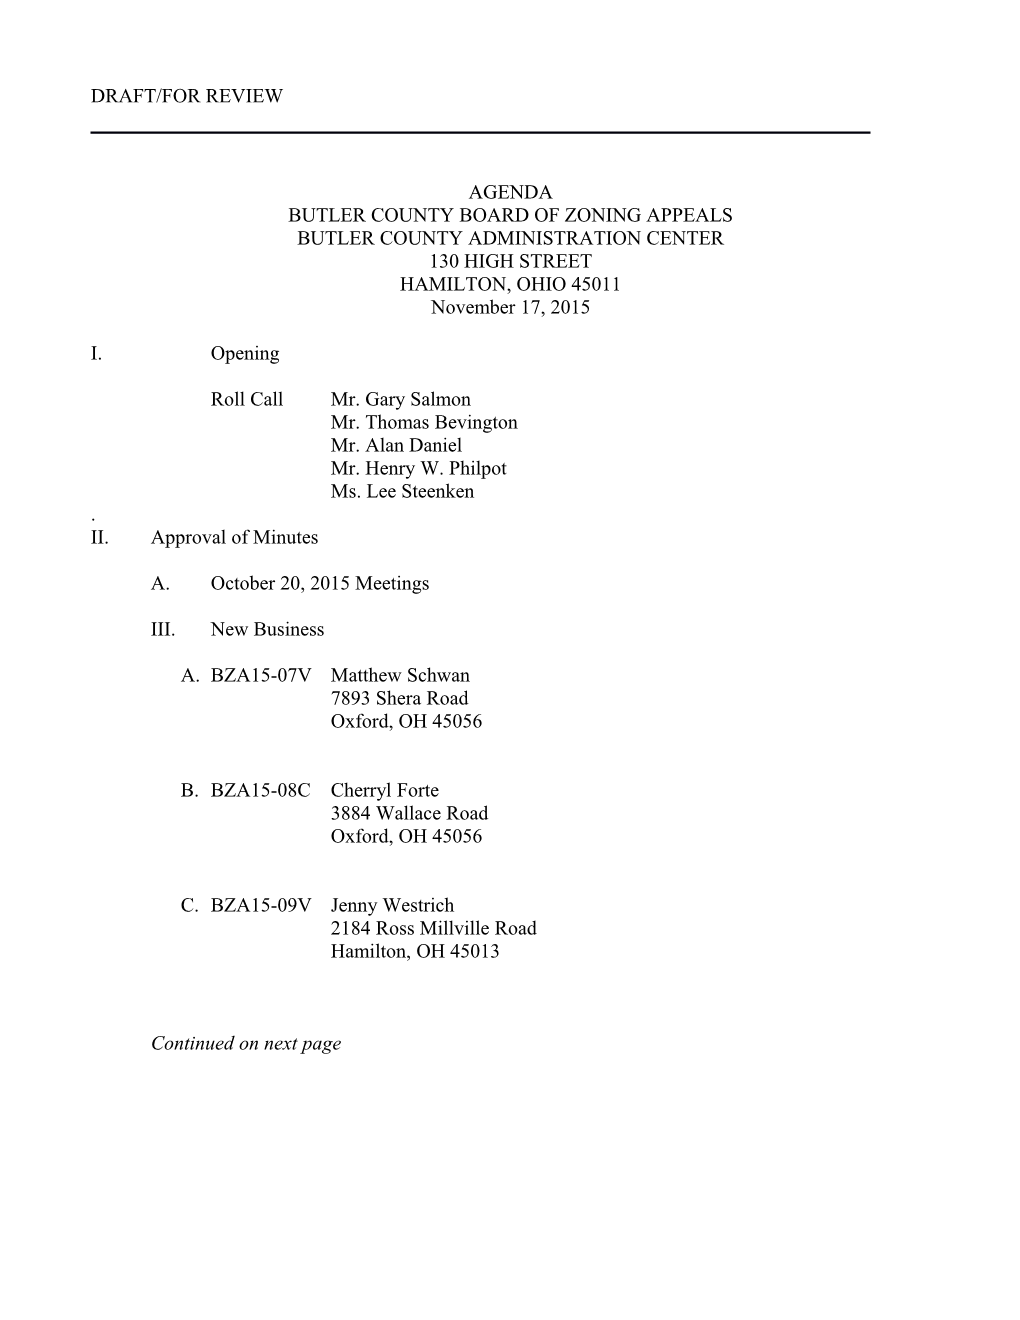 Butler County Board of Zoning Appeals